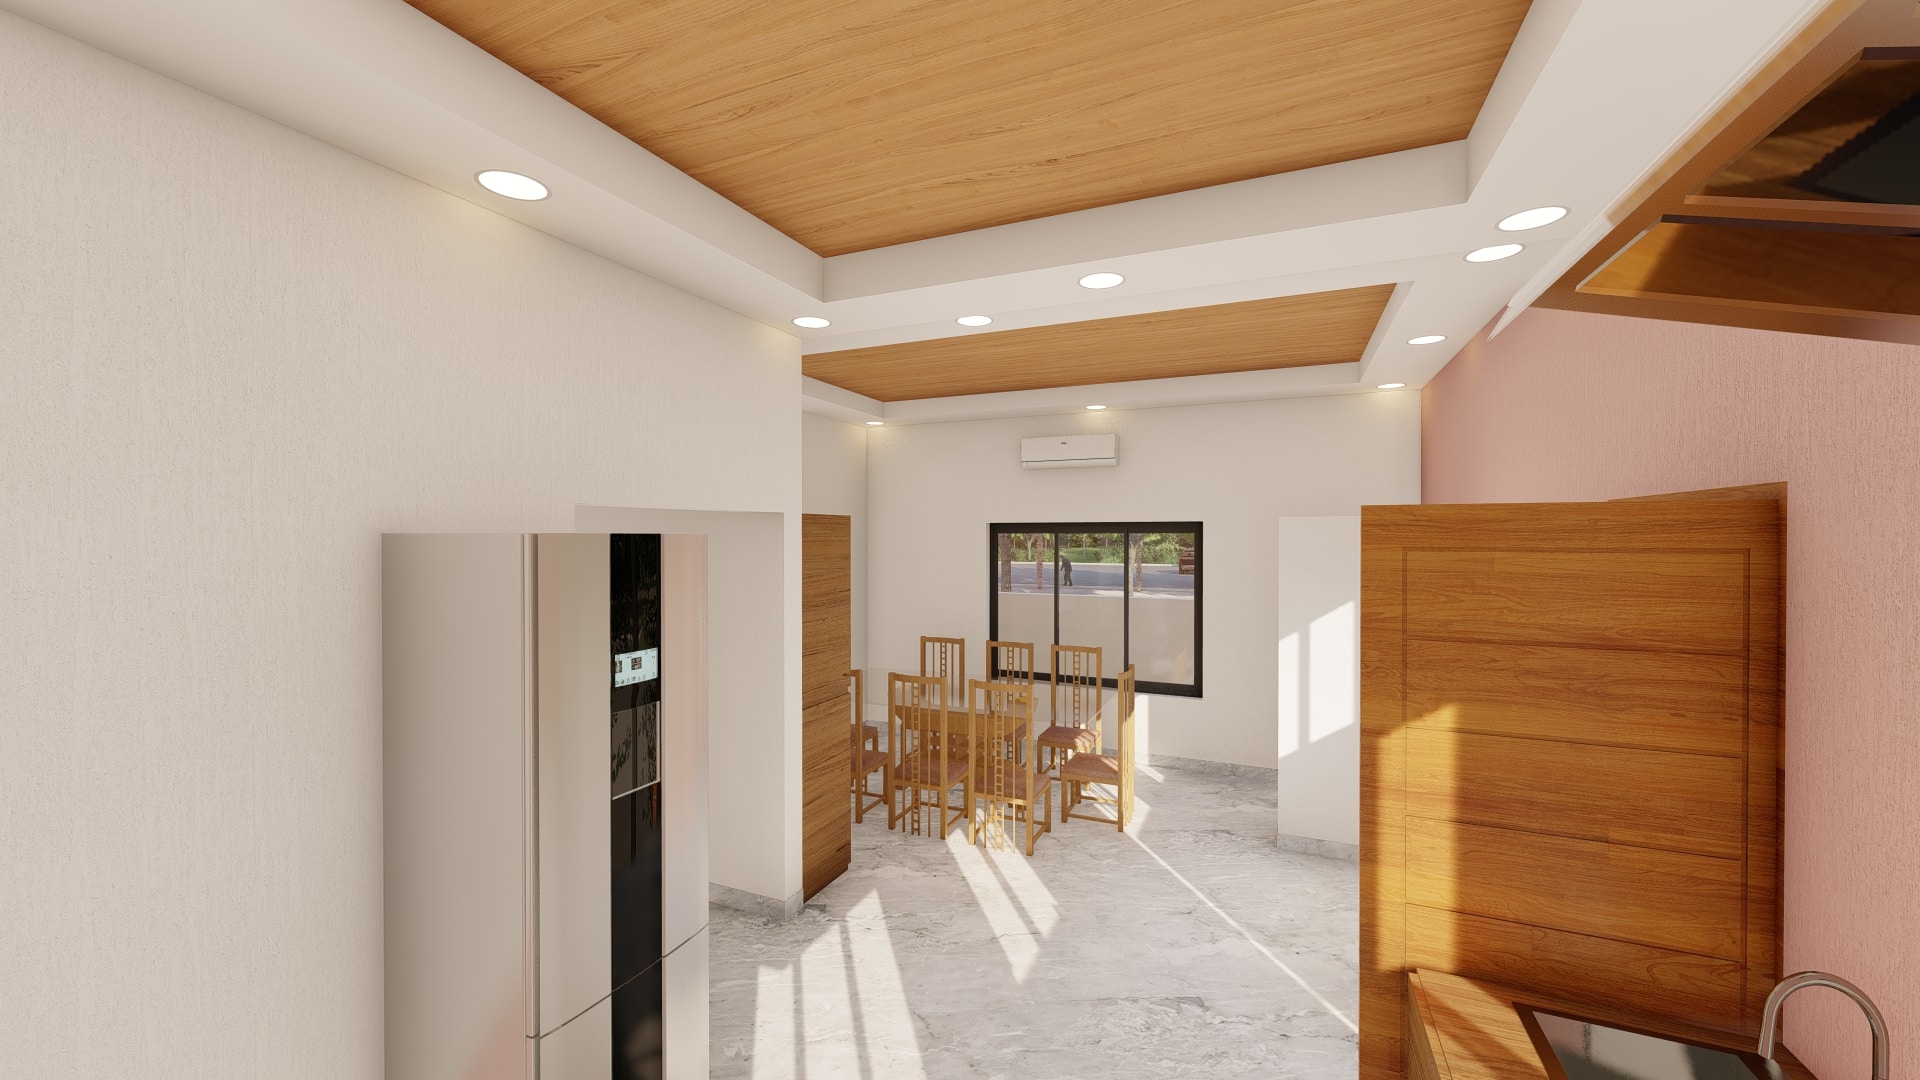 big kitchen with dining area and pooja area of new villa construction floor plan by urban terrace west facing 1800sf